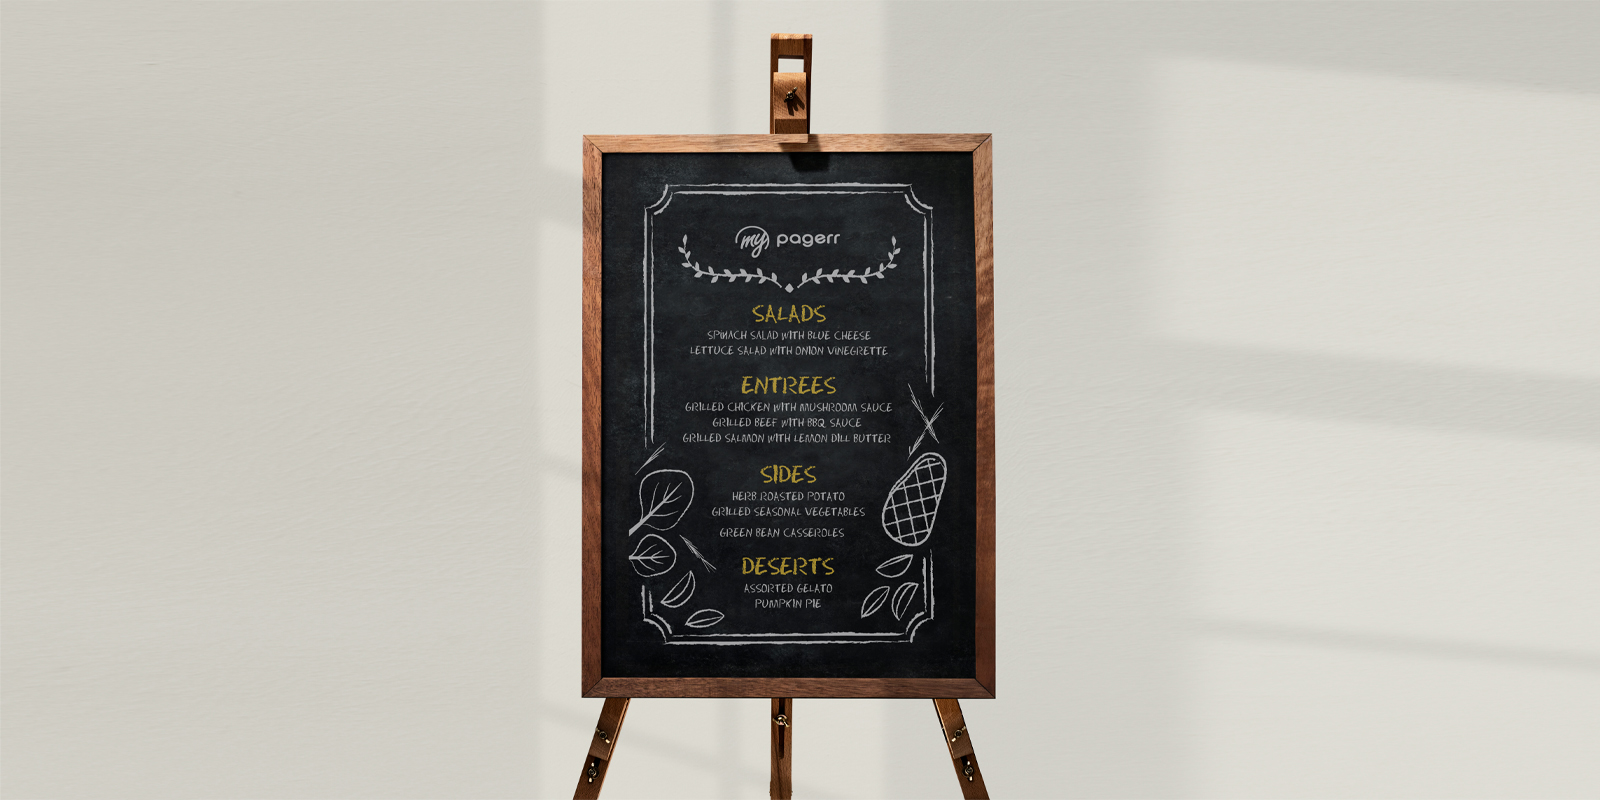 Chalkboard signs in Madrid - Print with Pagerr